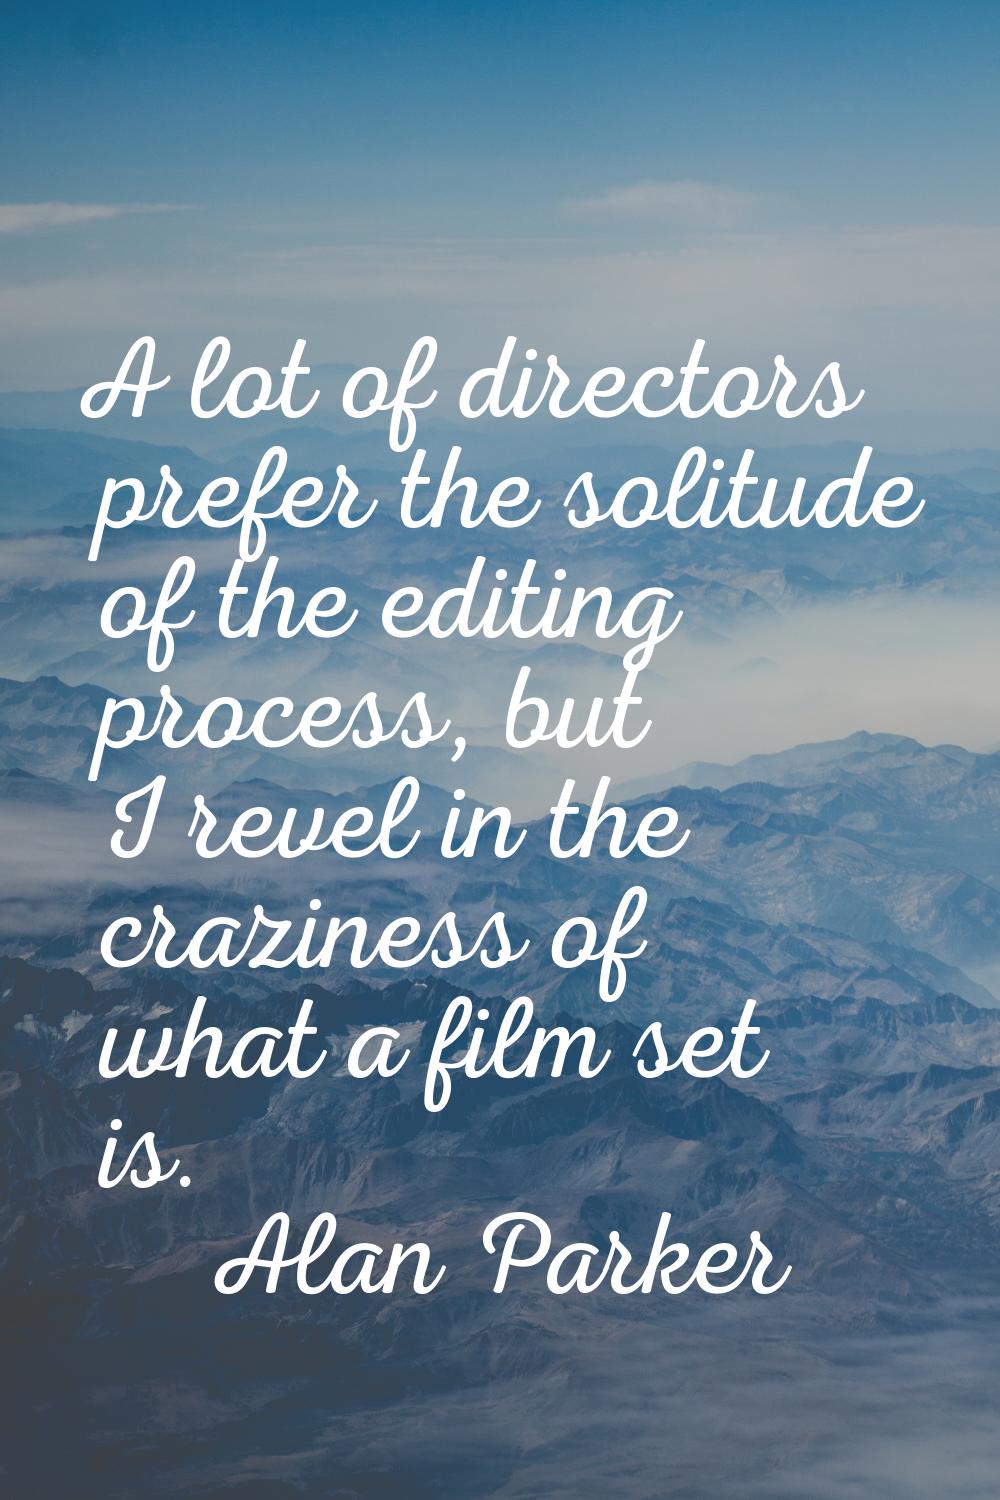 A lot of directors prefer the solitude of the editing process, but I revel in the craziness of what